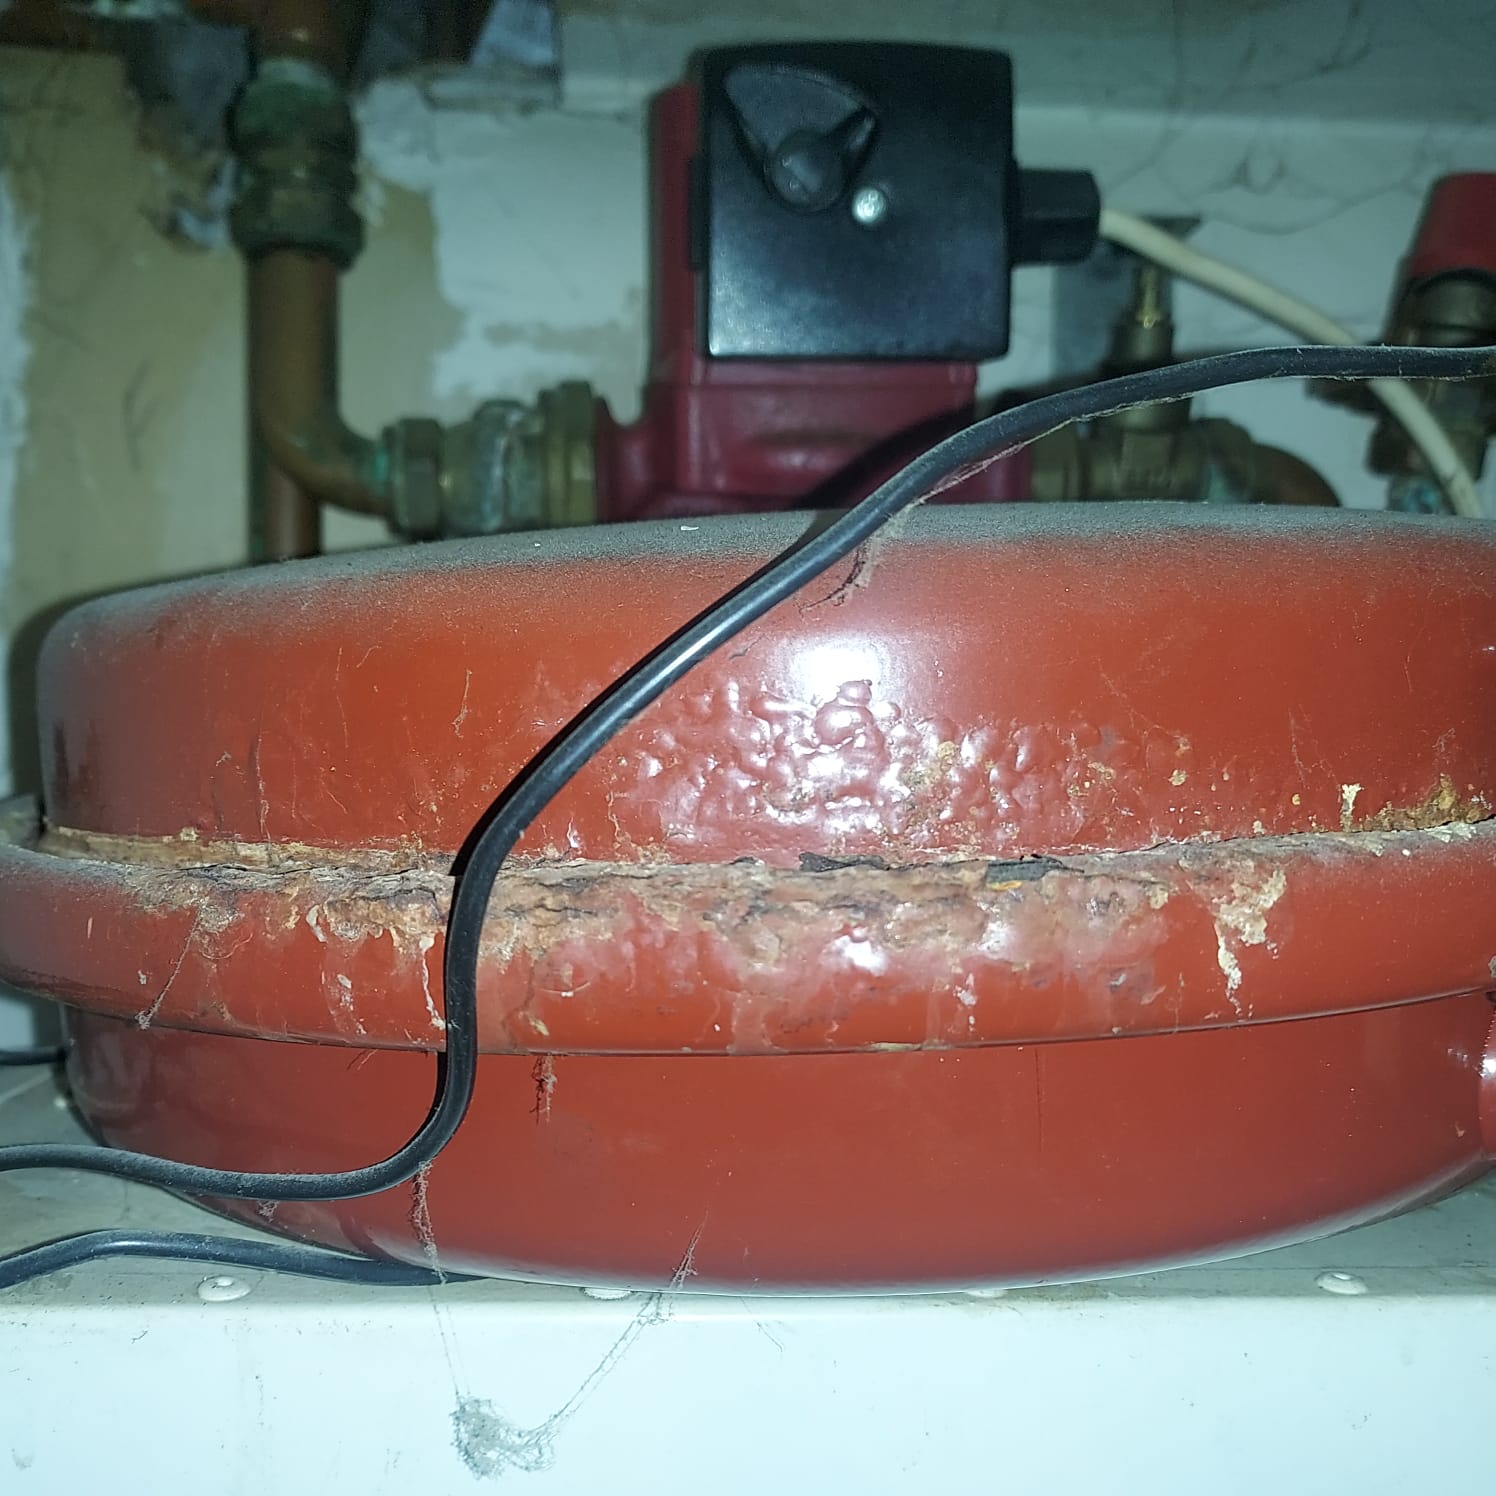 Old Heating System in need of Replacement